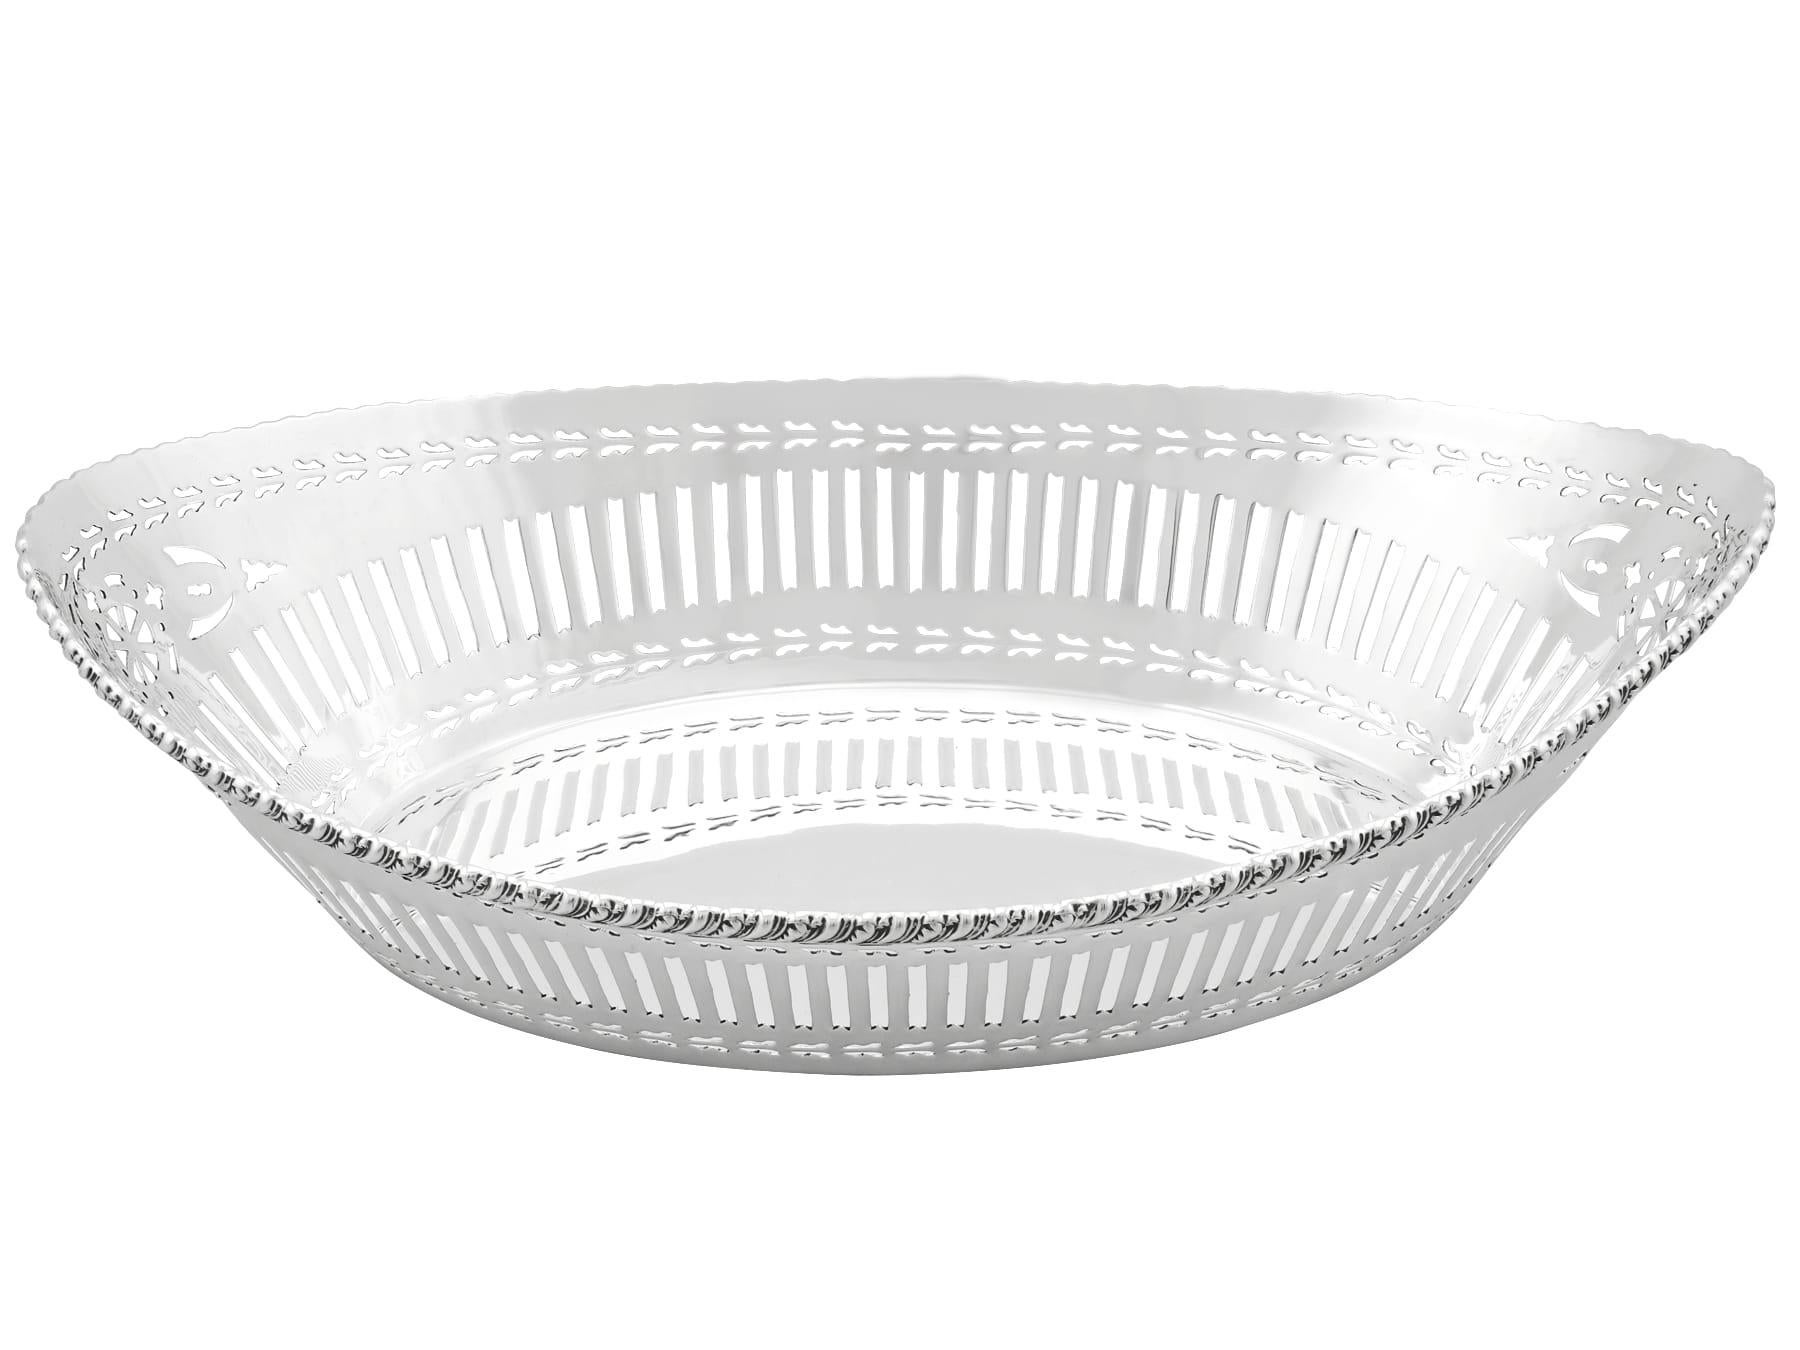 An exceptional, fine and impressive antique George V English sterling silver bread dish; an addition to our dining silverware collection.

This exceptional antique sterling silver dish has a plain oval boat shaped form.

The body of this